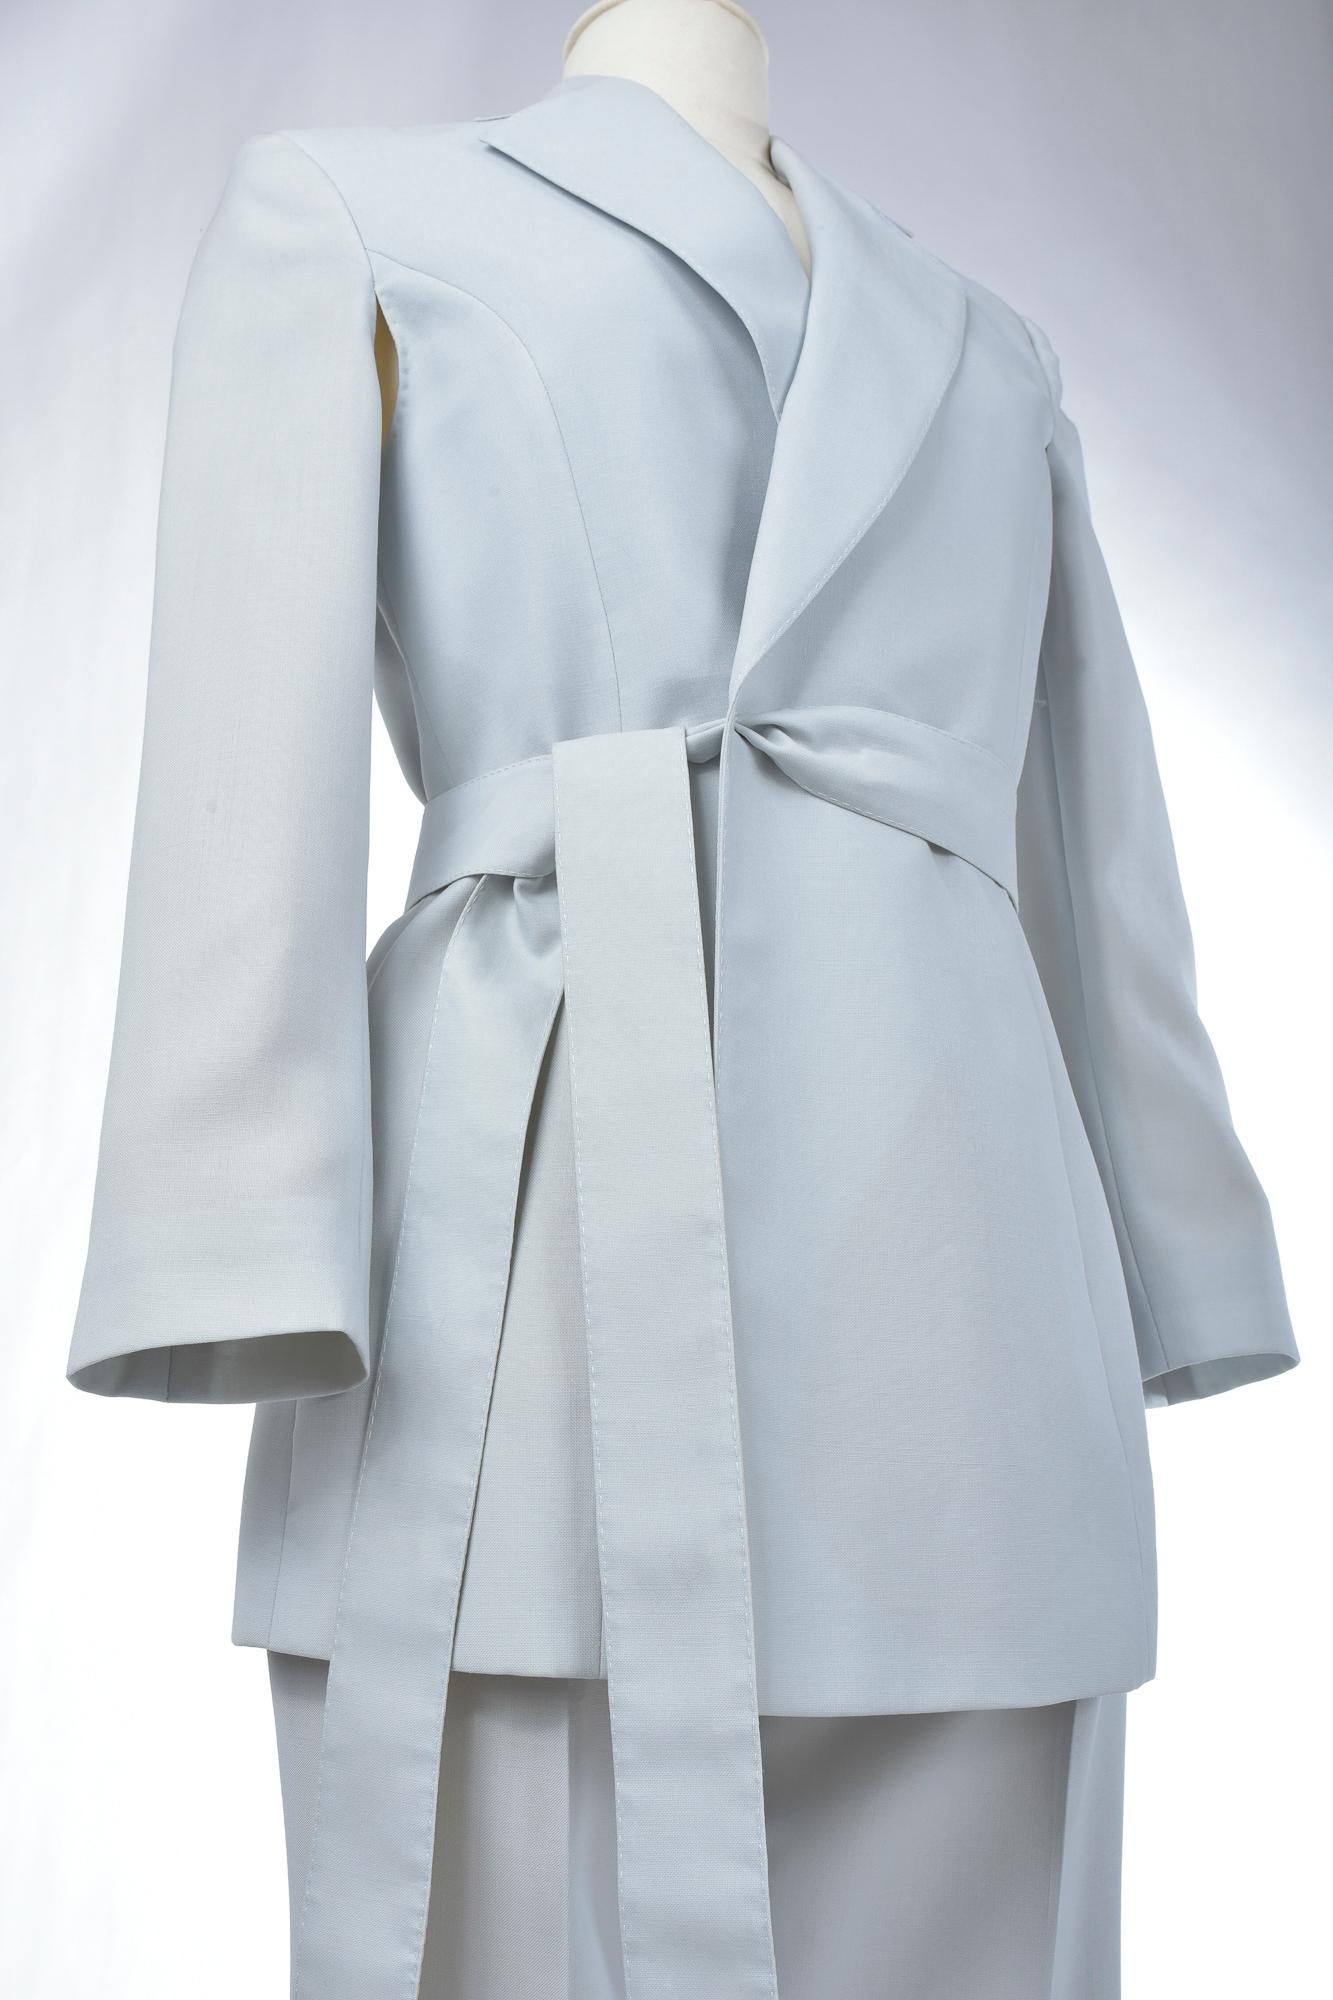 An Ice blue Tuxedo Pant Suit by Gianfranco Ferre - Italy Circa 1995 - 2000 For Sale 3